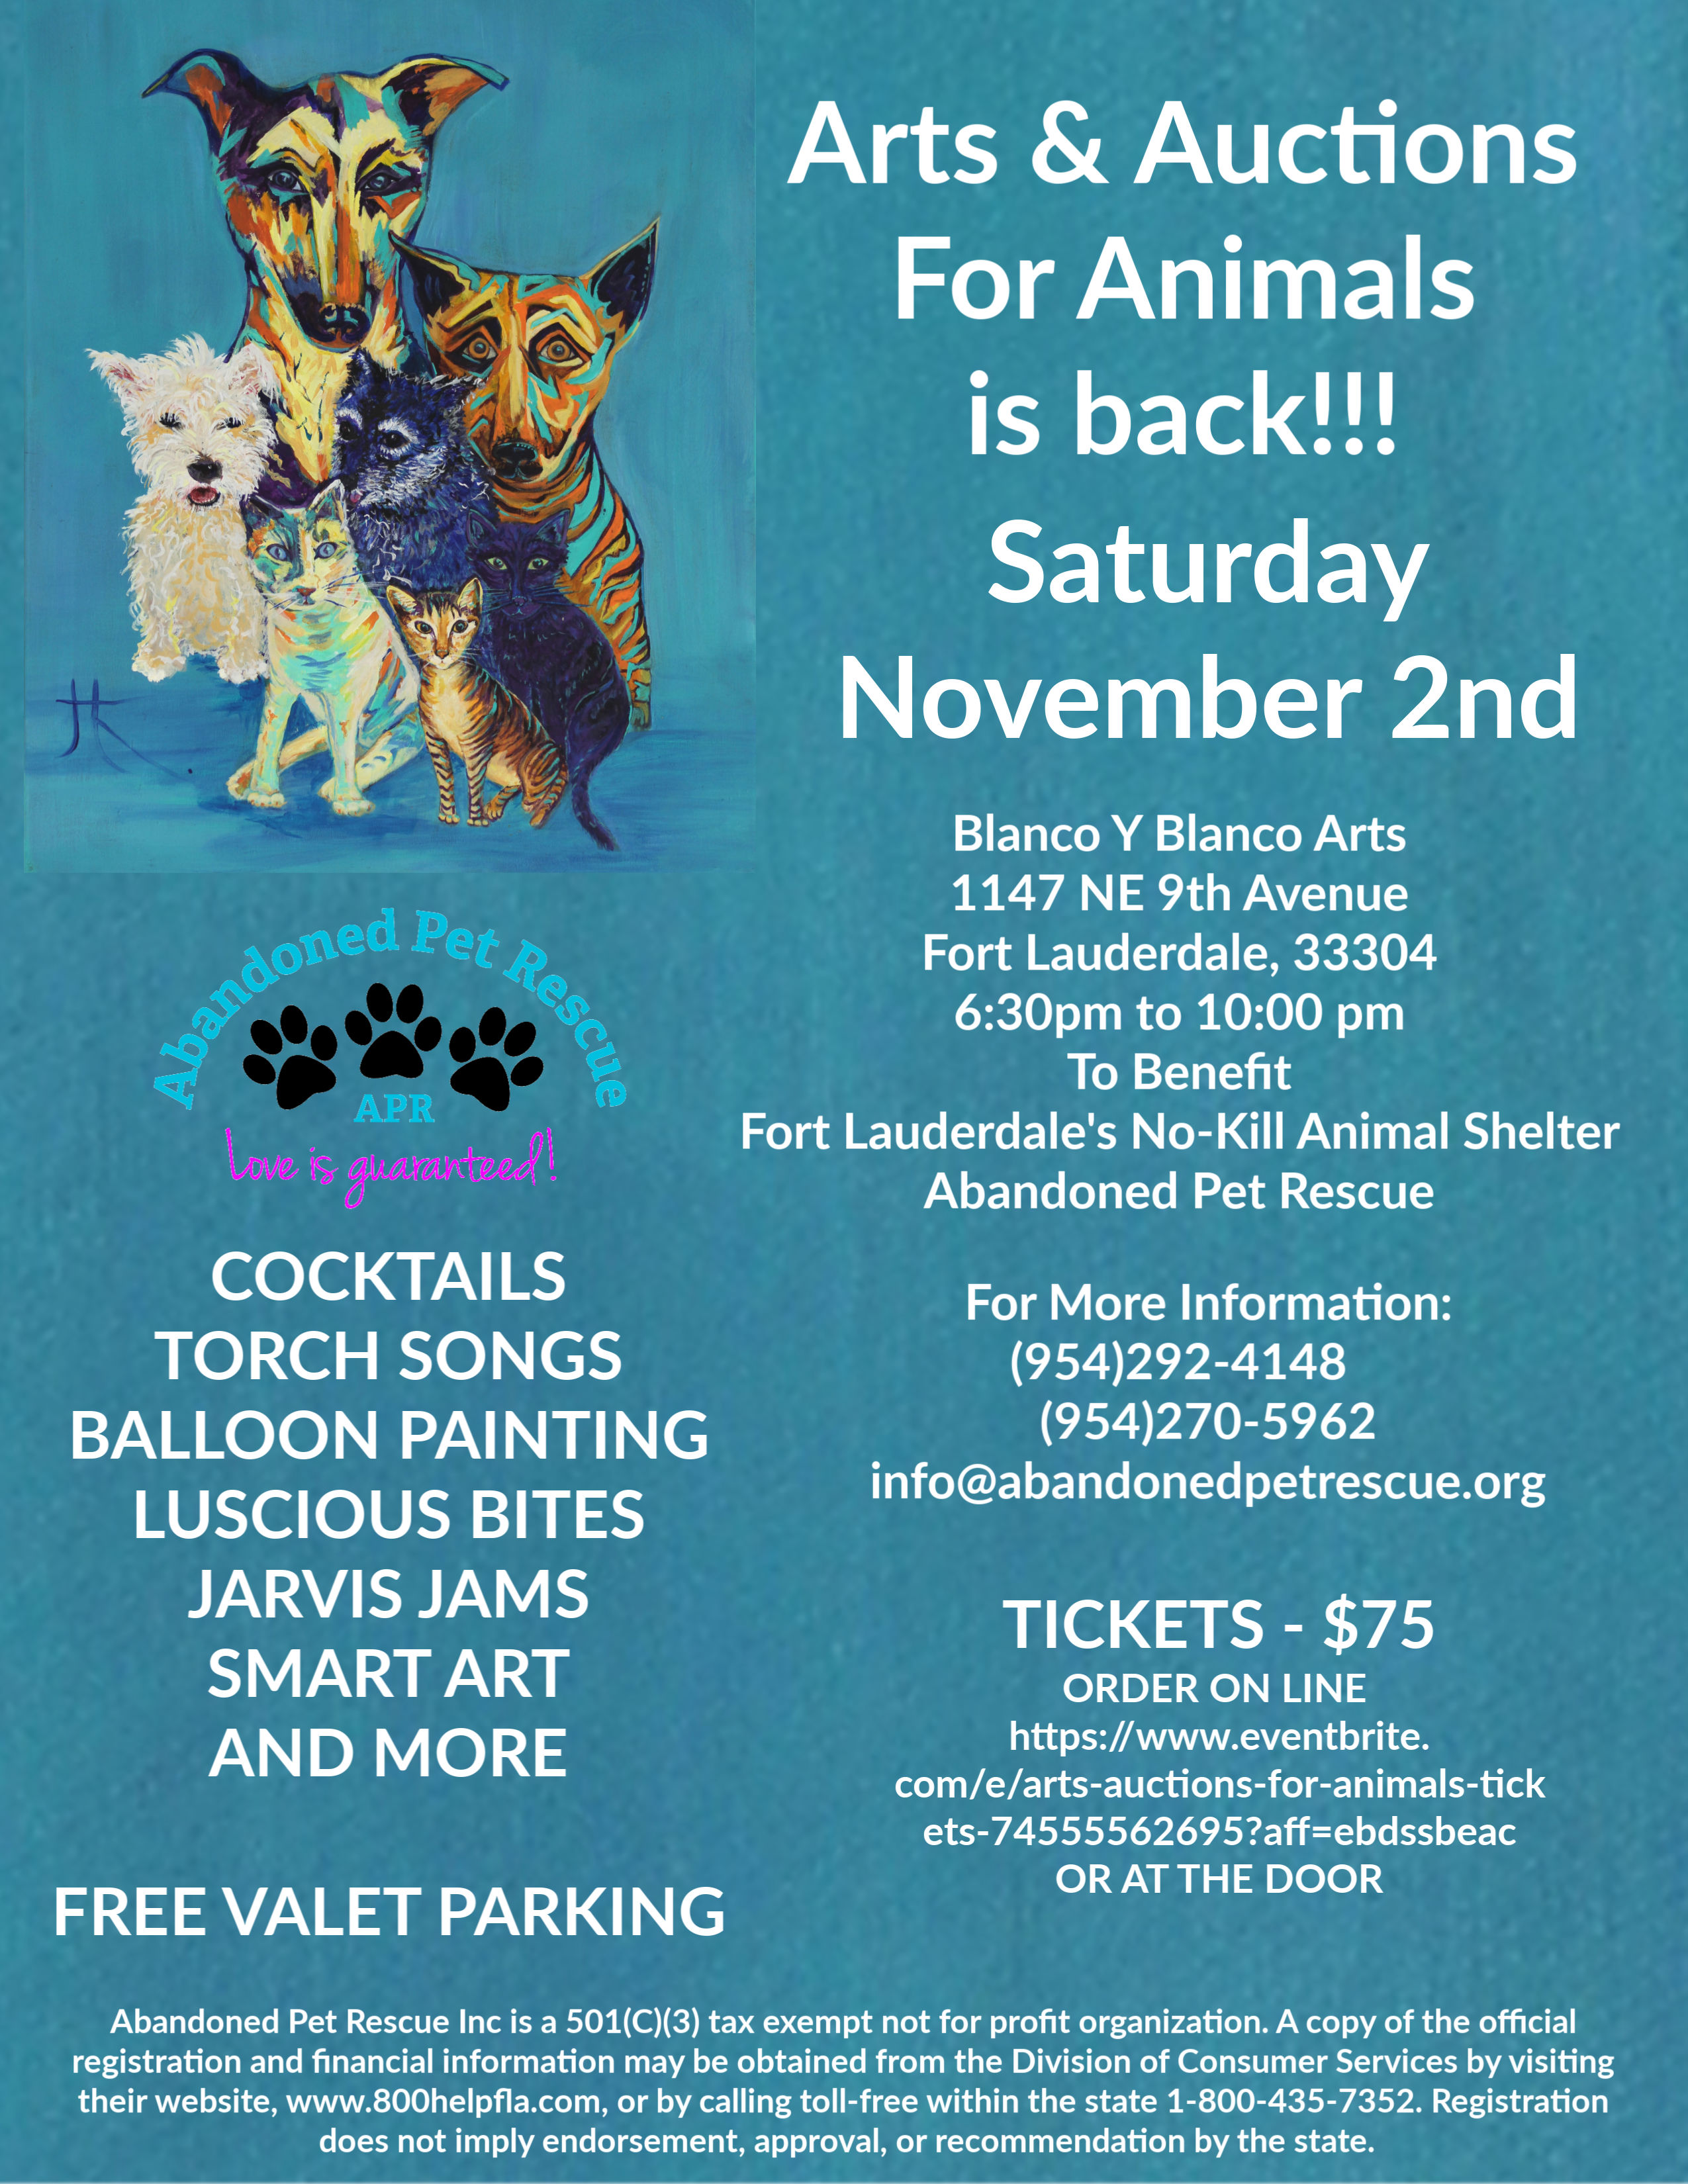 ARTS & AUCTIONS FOR ANIMALS (11/2/19) @ Blanco Y Blanco Arts | Fort Lauderdale | Florida | United States